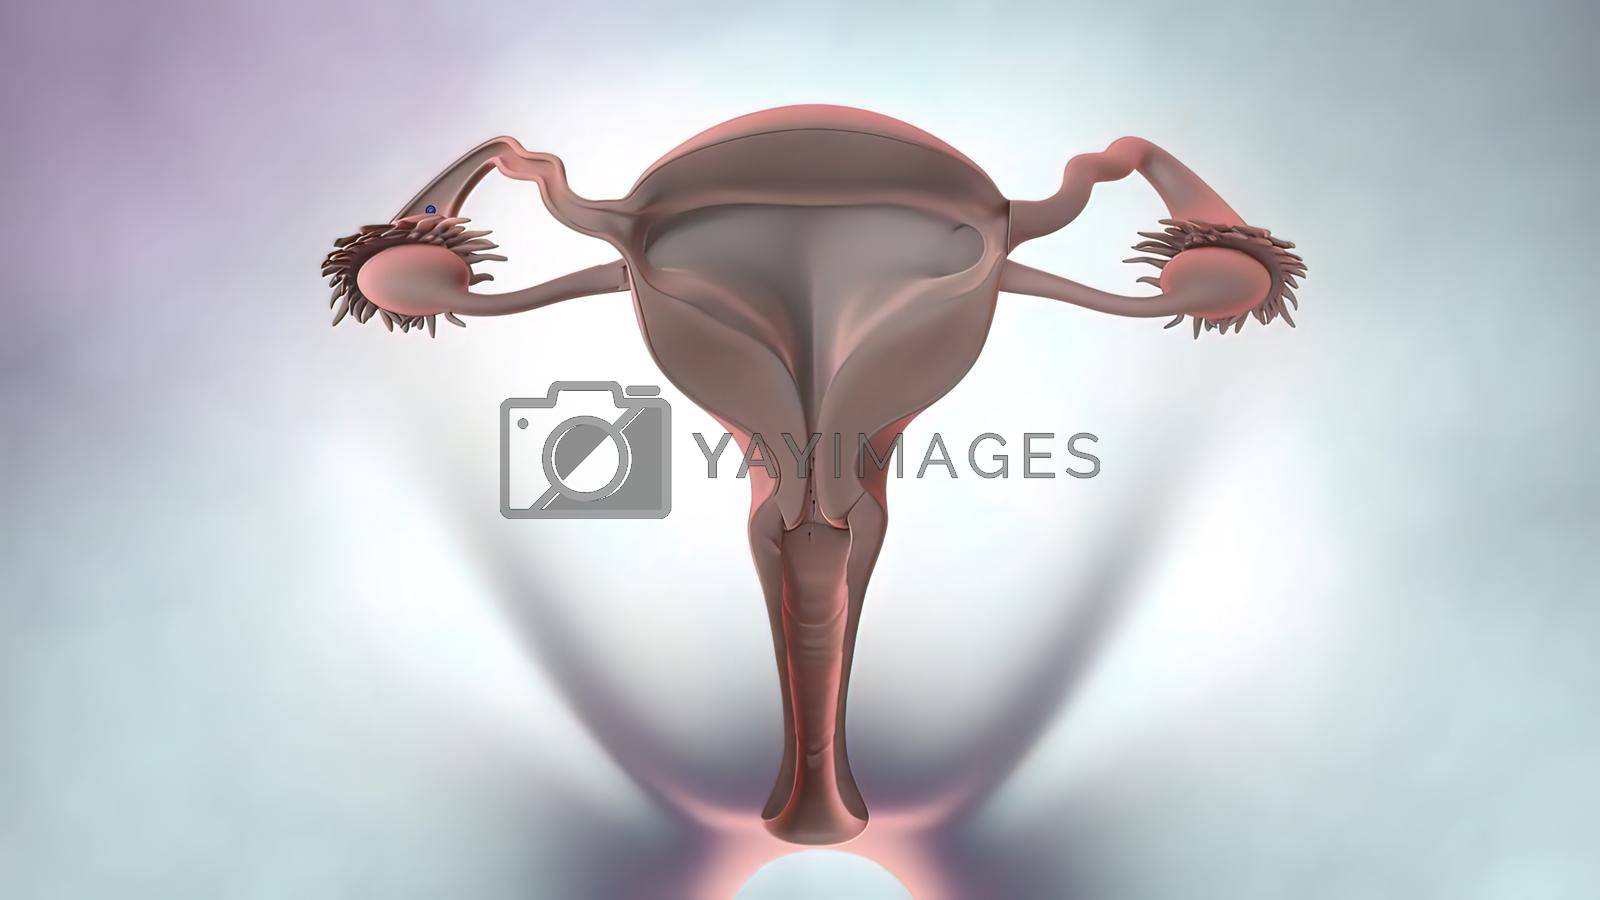 Royalty free image of 3D illustration Female reproductive organ anatomy. by creativepic